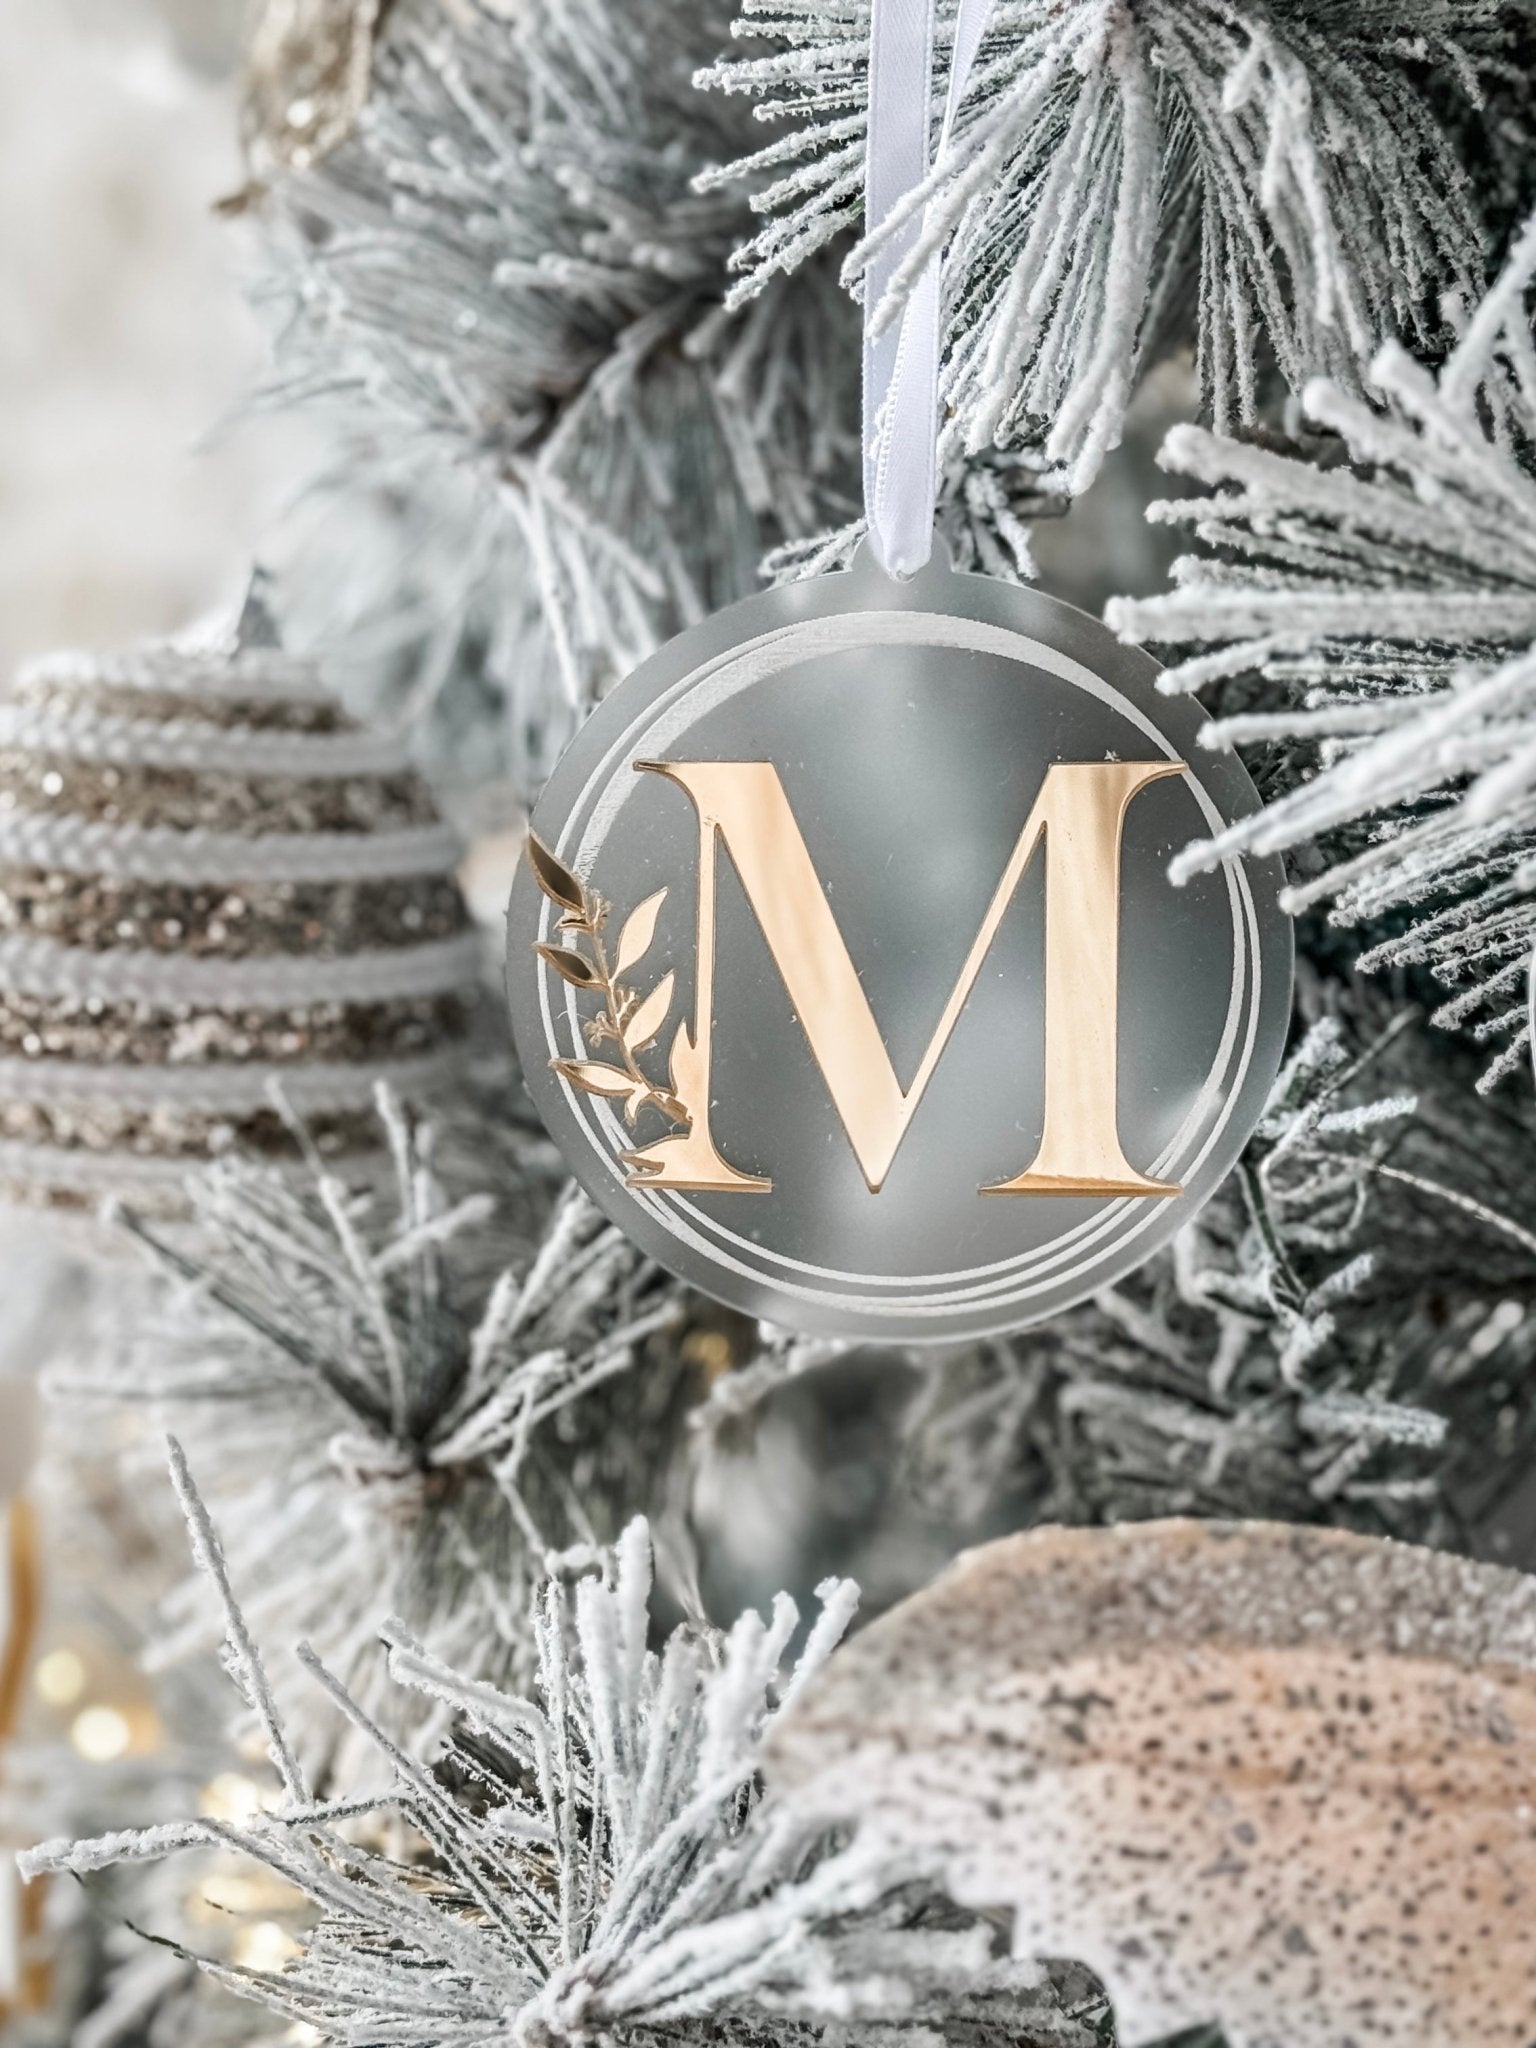 Double Layered Acrylic Monogram Ornament - The Humble Gift Co.